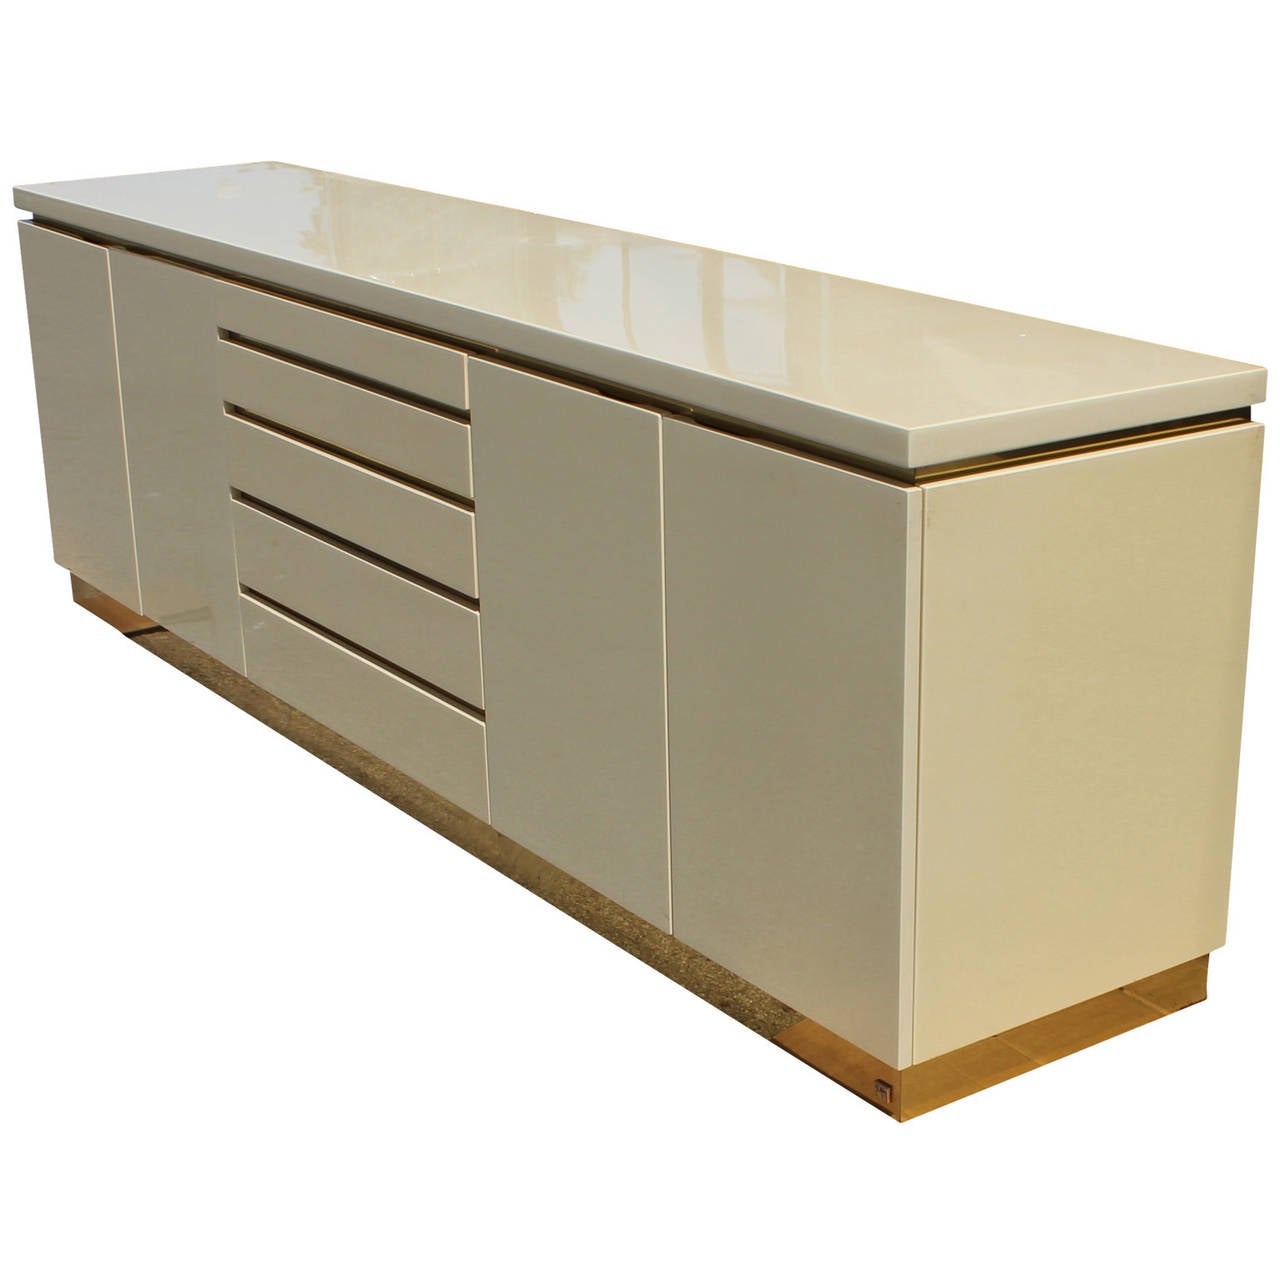 Stunning credenza/sideboard designed by Jean Claude Mahey. Credenza is finished in cream lacquer and brass. Signed on bottom right corner. Five drawers provide ample storage. Doors open to reveal a single adjustable shelf.